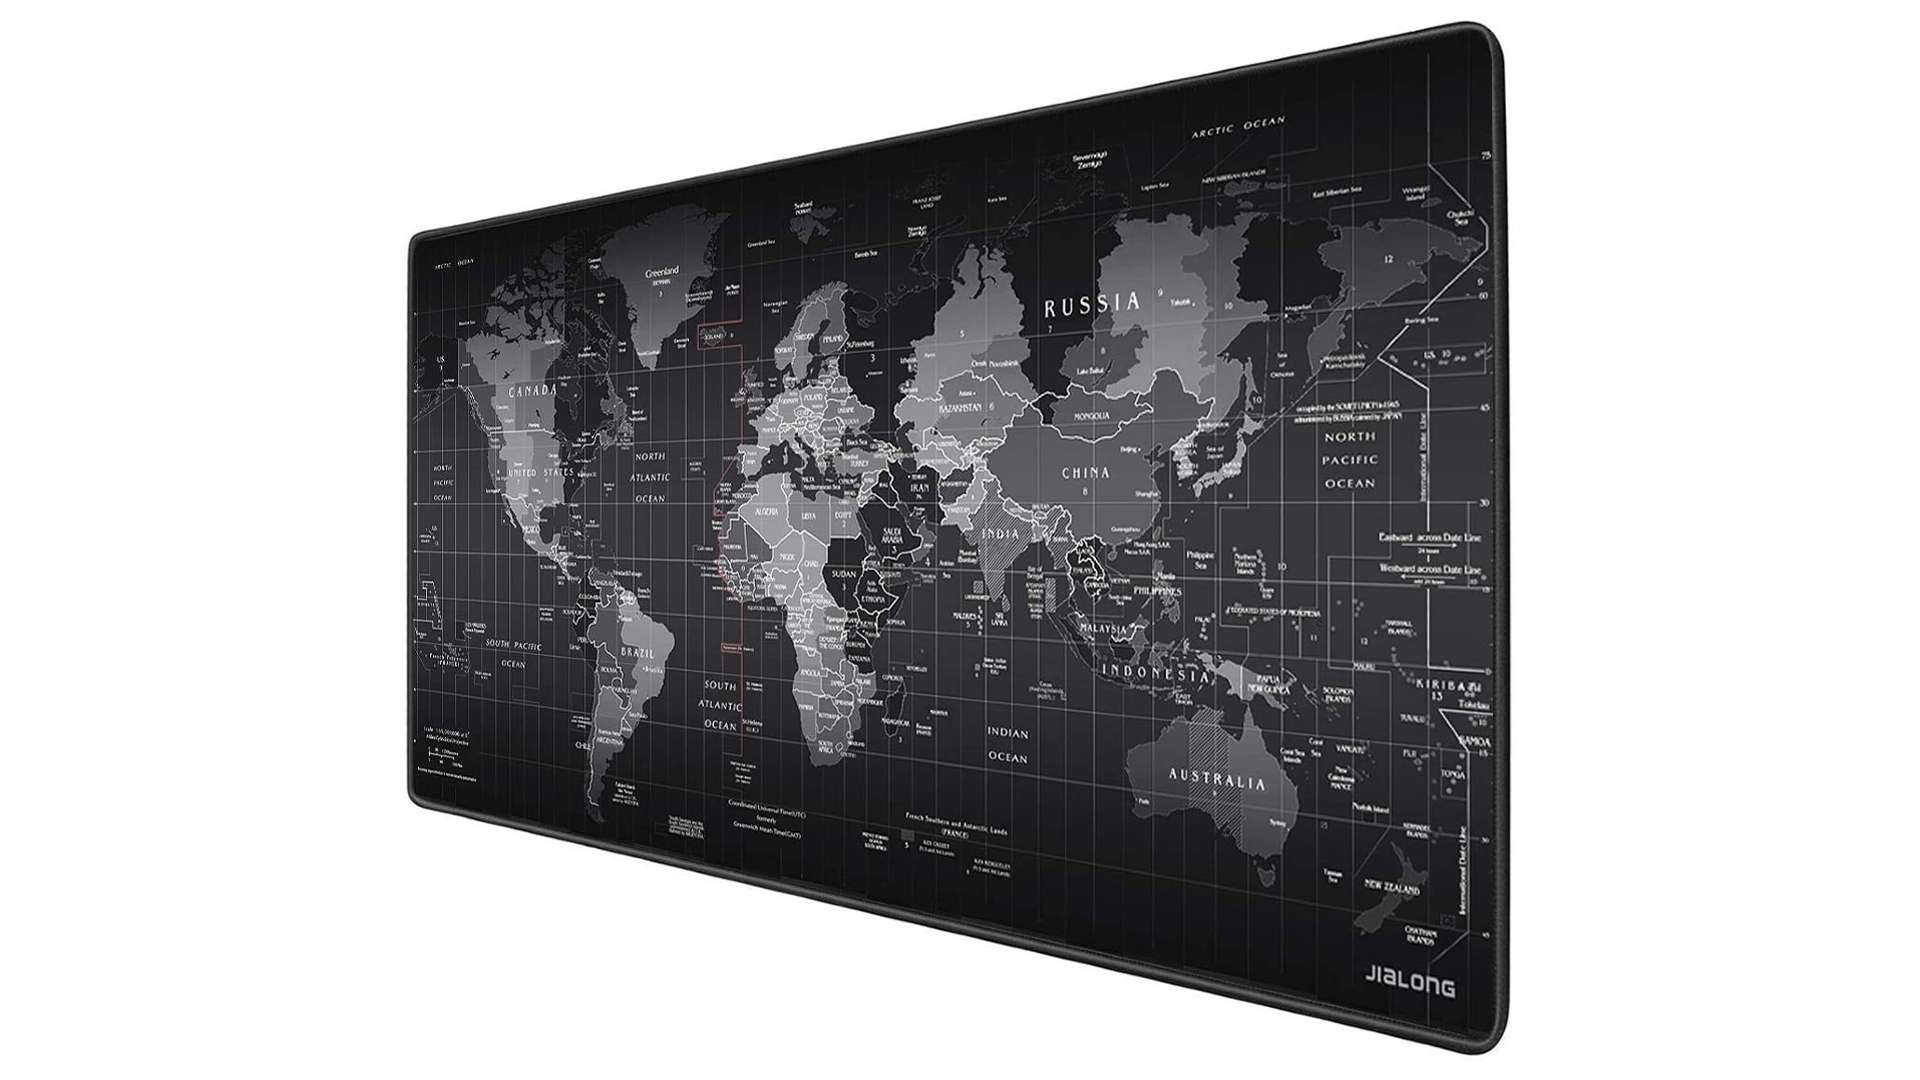 Jialong gaming mouse pad with world map printed in black and white on the surface of the mouse pad.